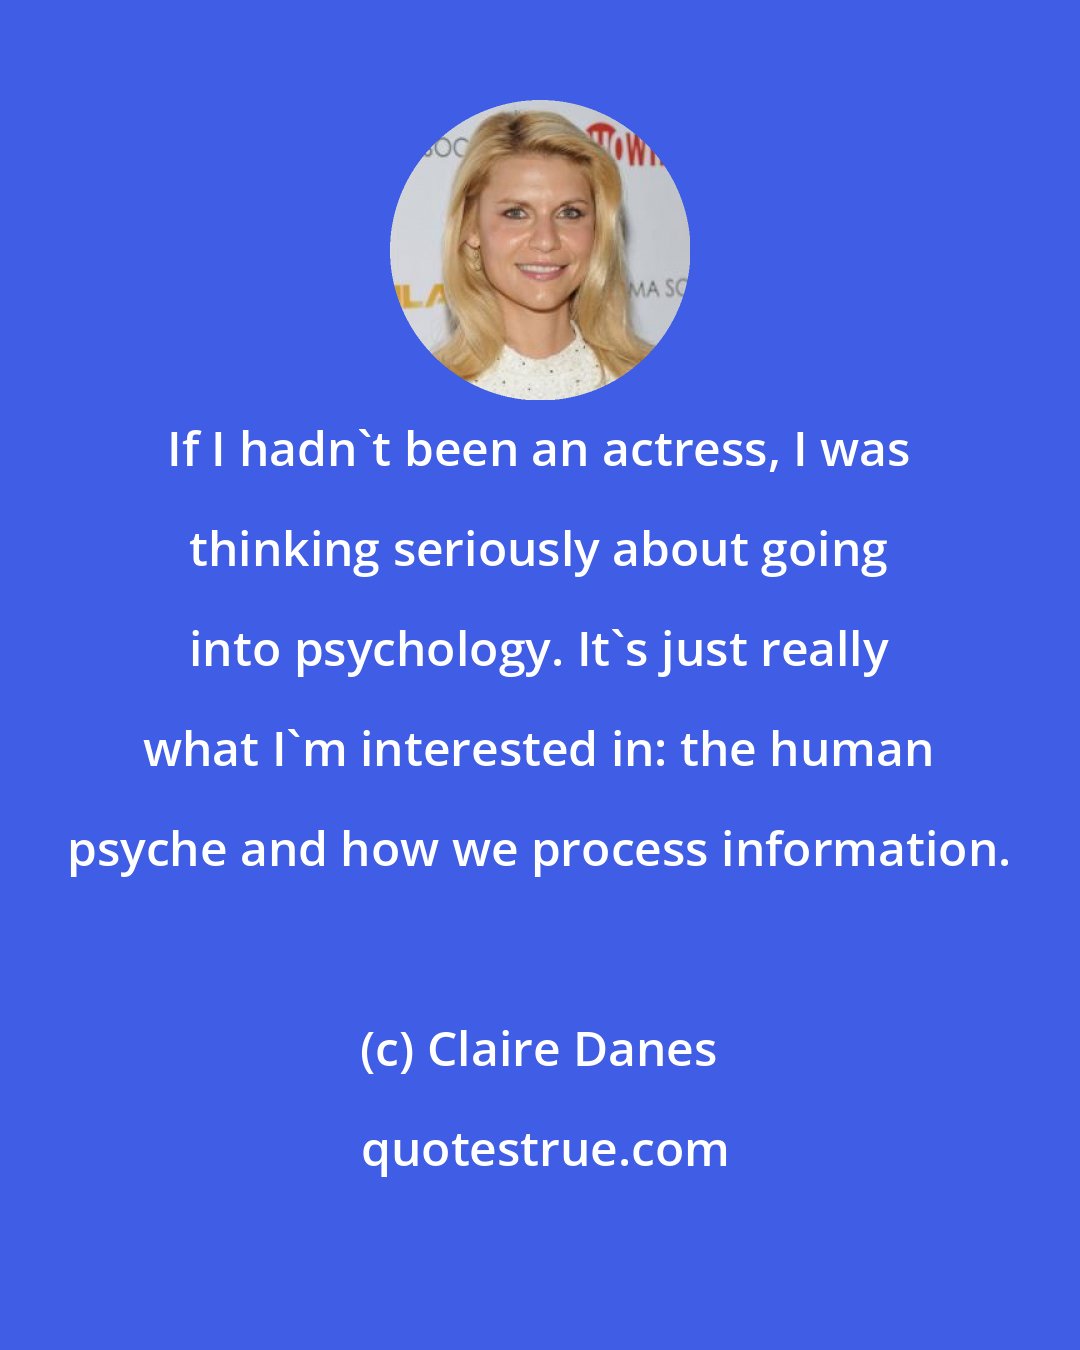 Claire Danes: If I hadn't been an actress, I was thinking seriously about going into psychology. It's just really what I'm interested in: the human psyche and how we process information.